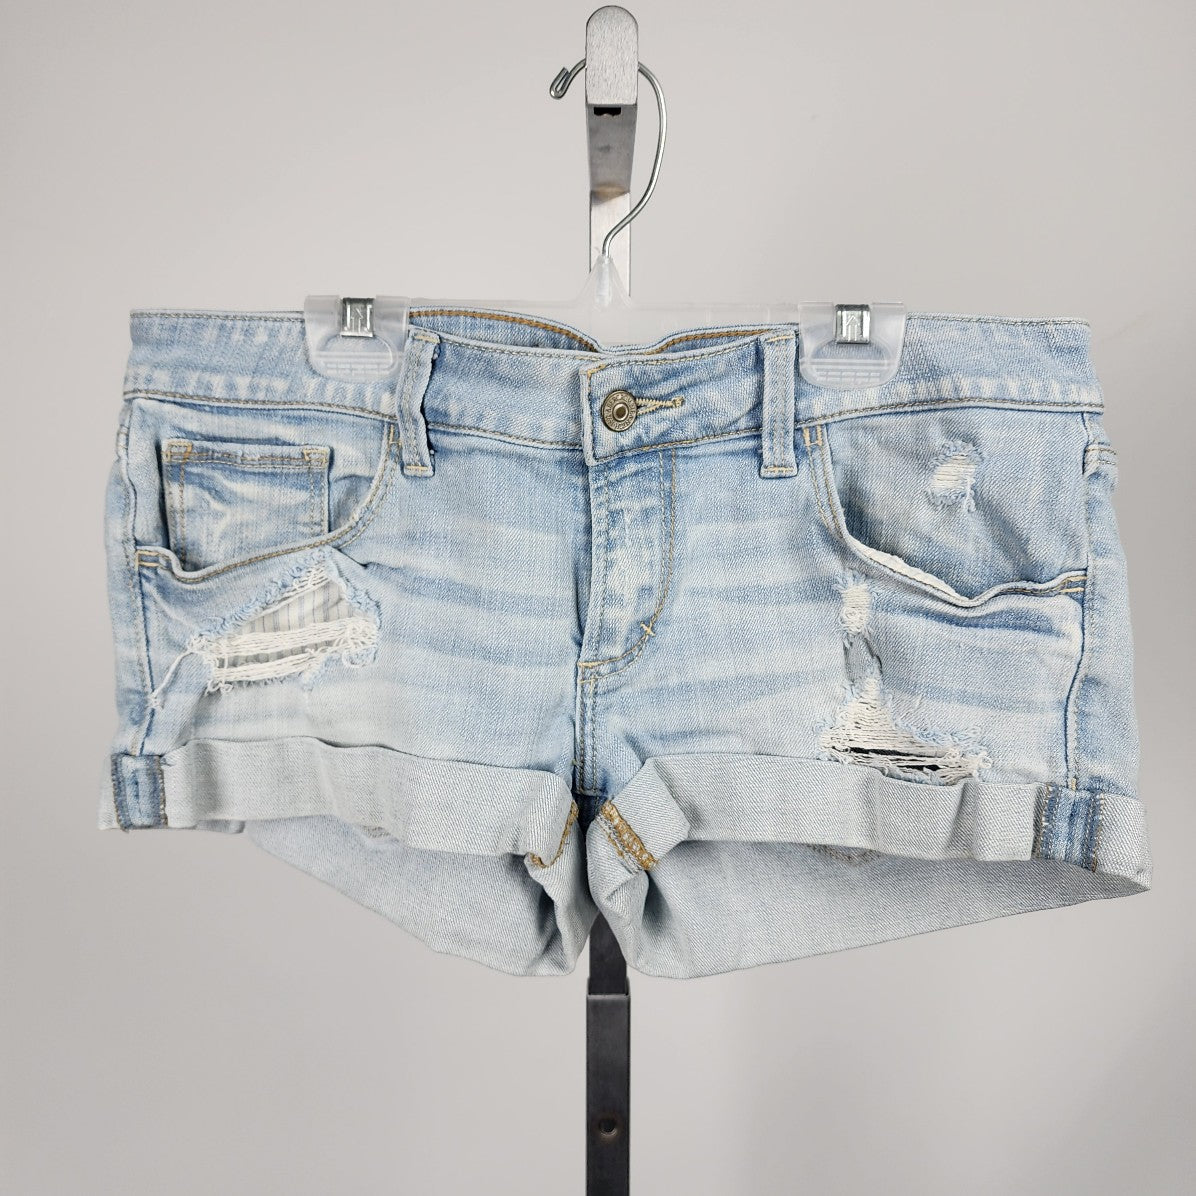 Abercrombie & Fitch Blue Distressed Jean Shorts Size 28